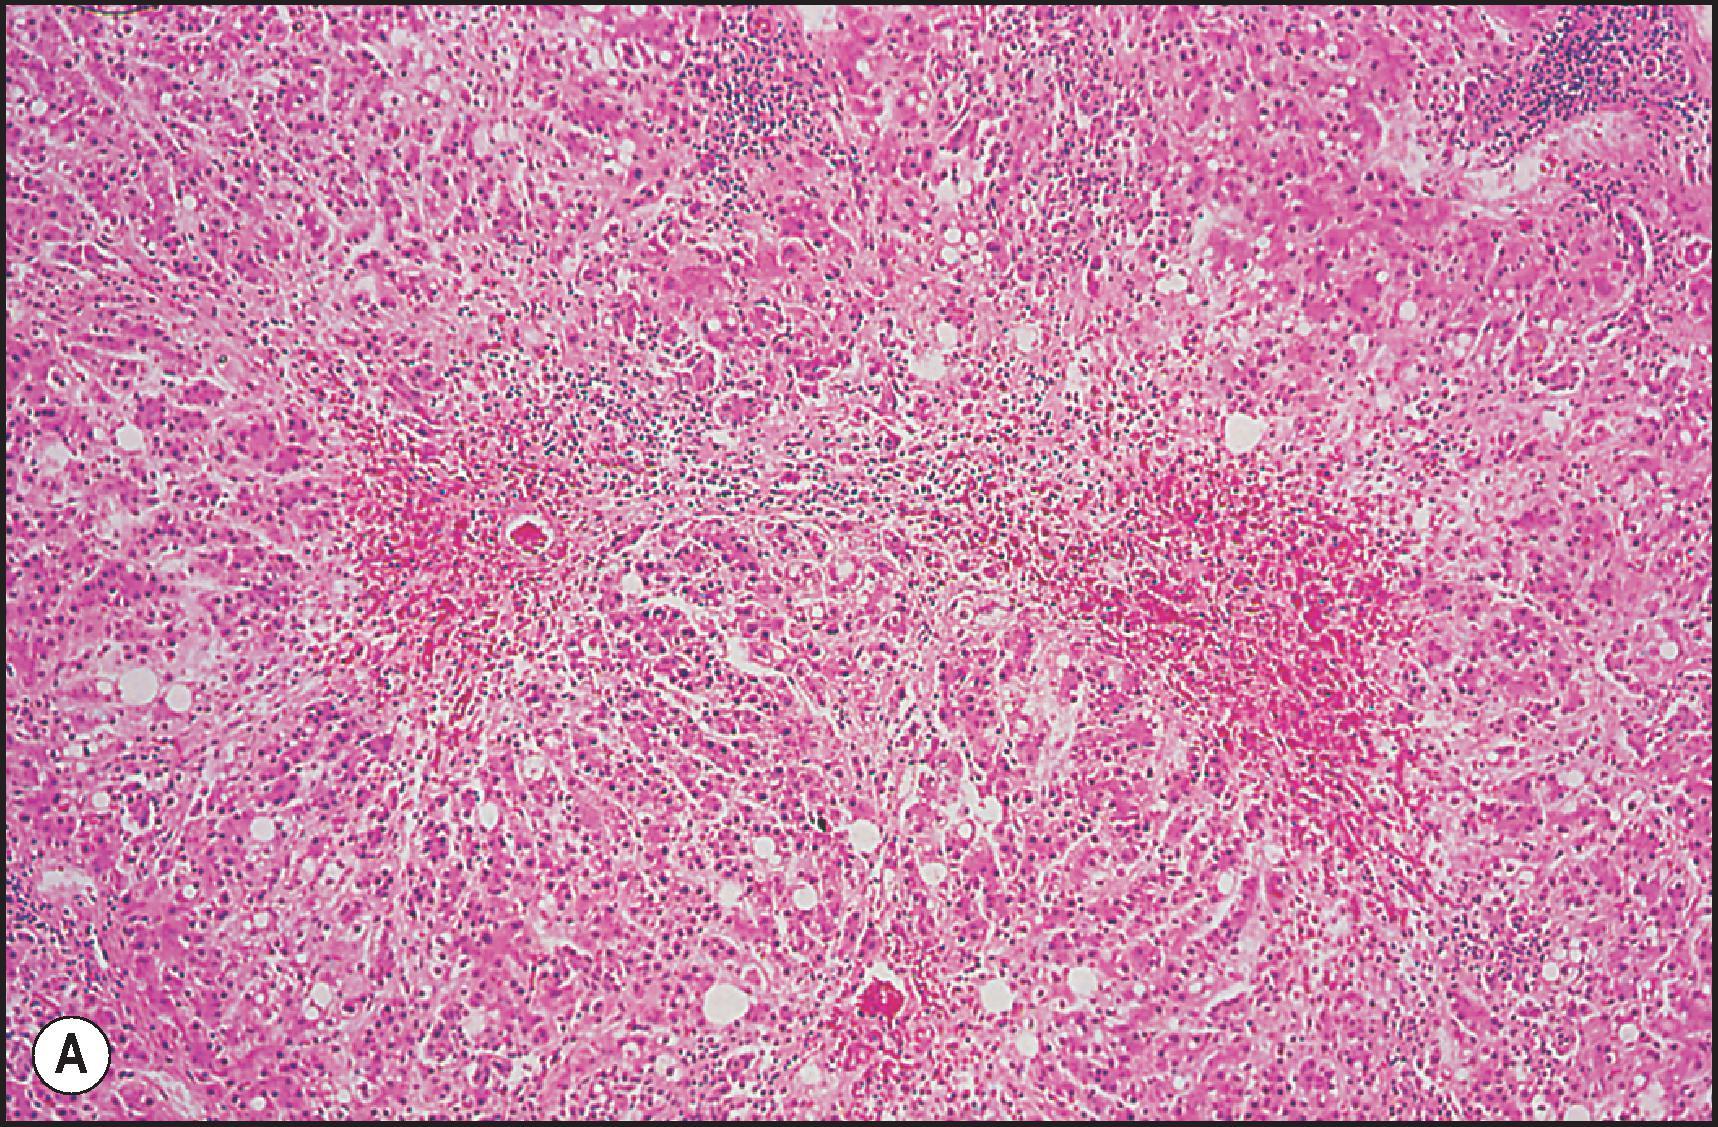 Figure 12.30, Toxic necrosis. (A) Carbon tetrachloride toxicity with bridging perivenular necrosis. Note focal steatosis in preserved parenchyma. (H&E.) (B) Phosphorus toxicity showing zone 1 necrosis with a mild lymphocytic infiltrate. (H&E.) Case courtesy of P. Bedossa.